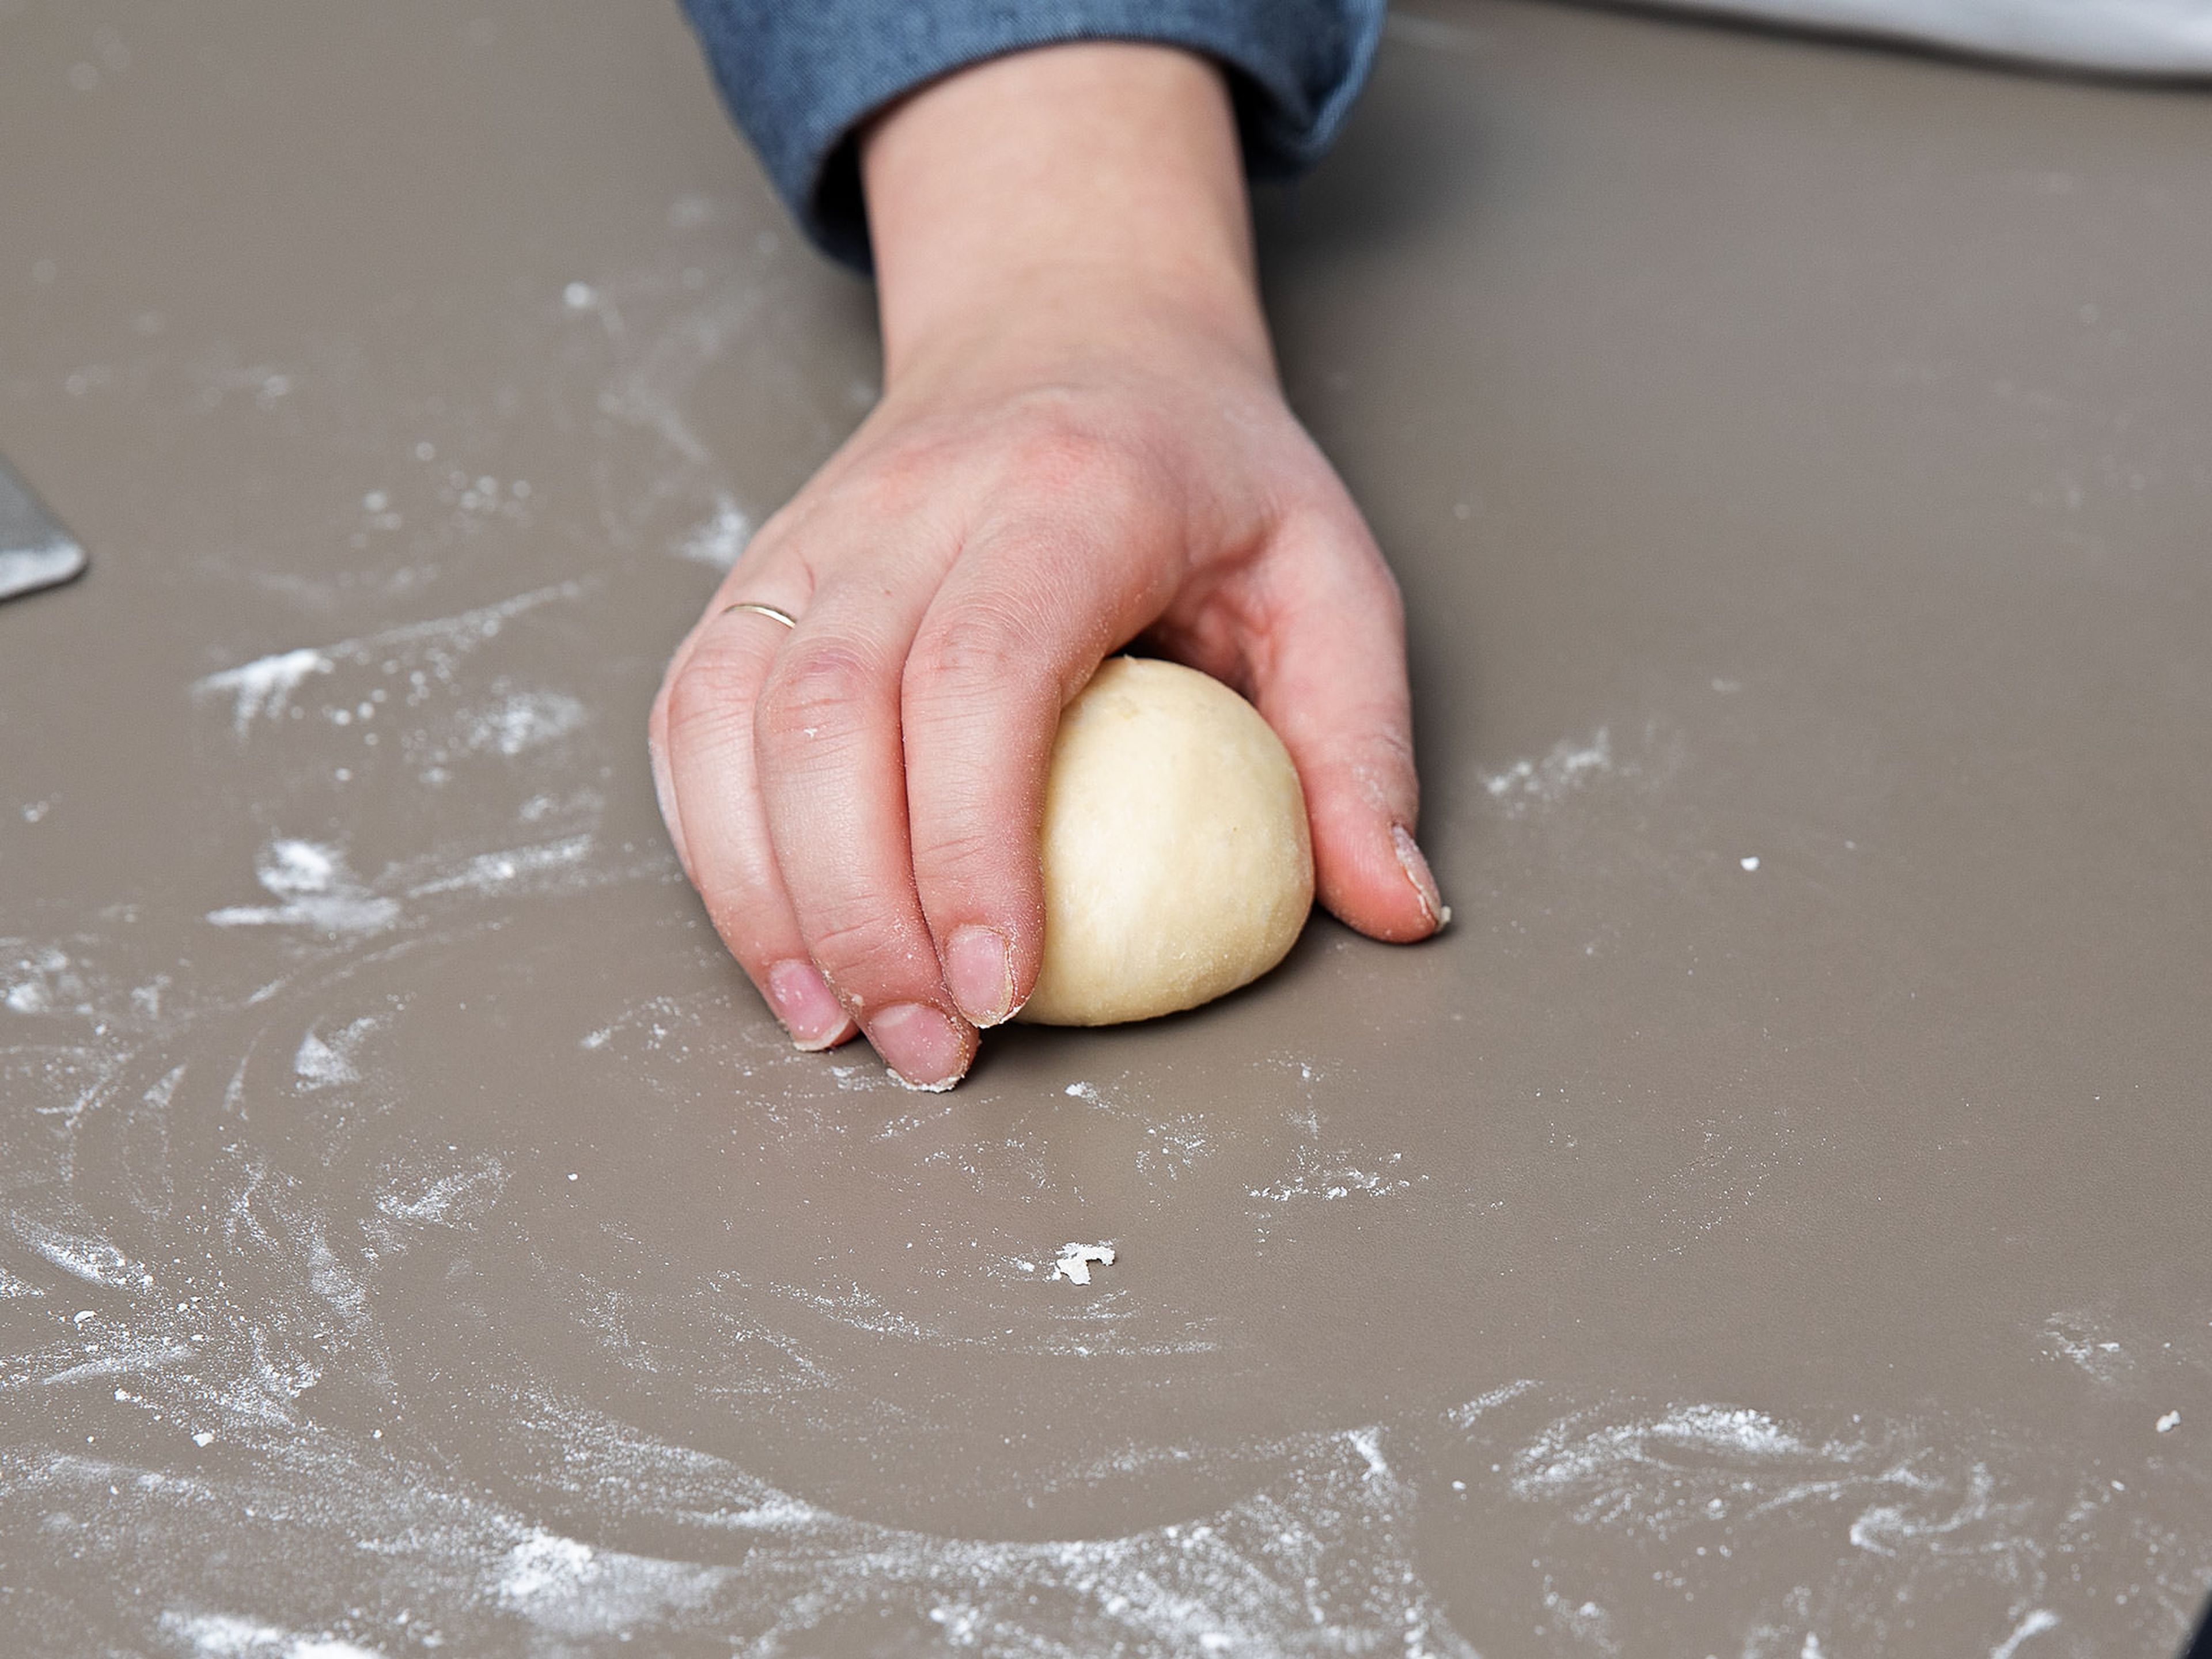 Cut the dough into even pieces and roll into balls. Place on a parchment-lined baking sheet, dust with flour and cover with kitchen towel. Let rise for at least 1 hr.